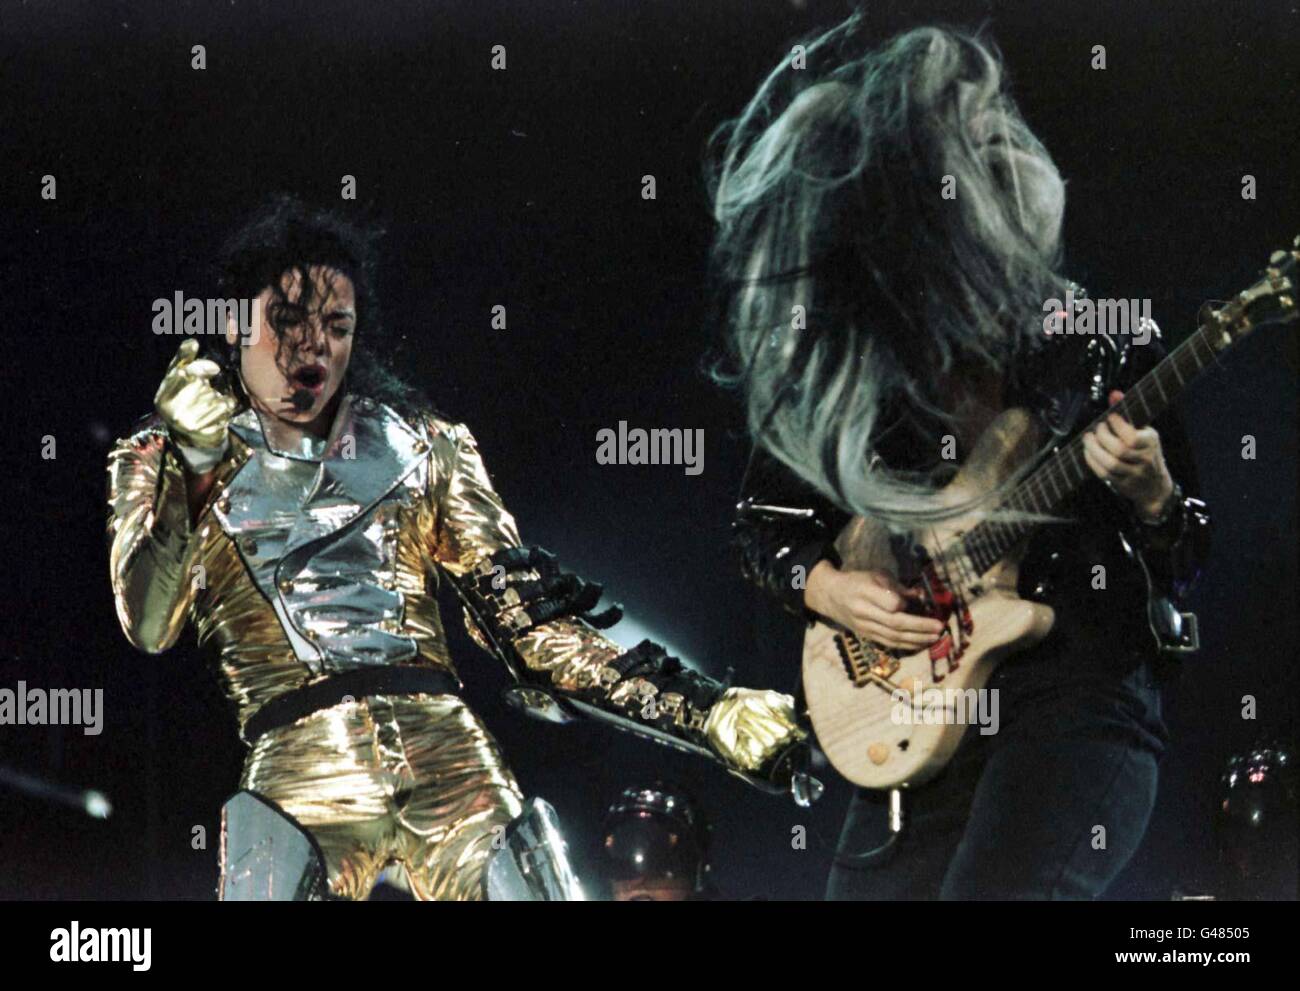 FOR EDITORIAL USE ONLY IN CONNECTION WITH COVERAGE OF TONIGHT'S CONCERT (ONE USE ONLY) : American super star Michael Jackson on stage at the Don Valley Stadium, Sheffield, during the first of his concerts this evening (Wednesday). Photo by Owen Humphreys/PA. Stock Photo